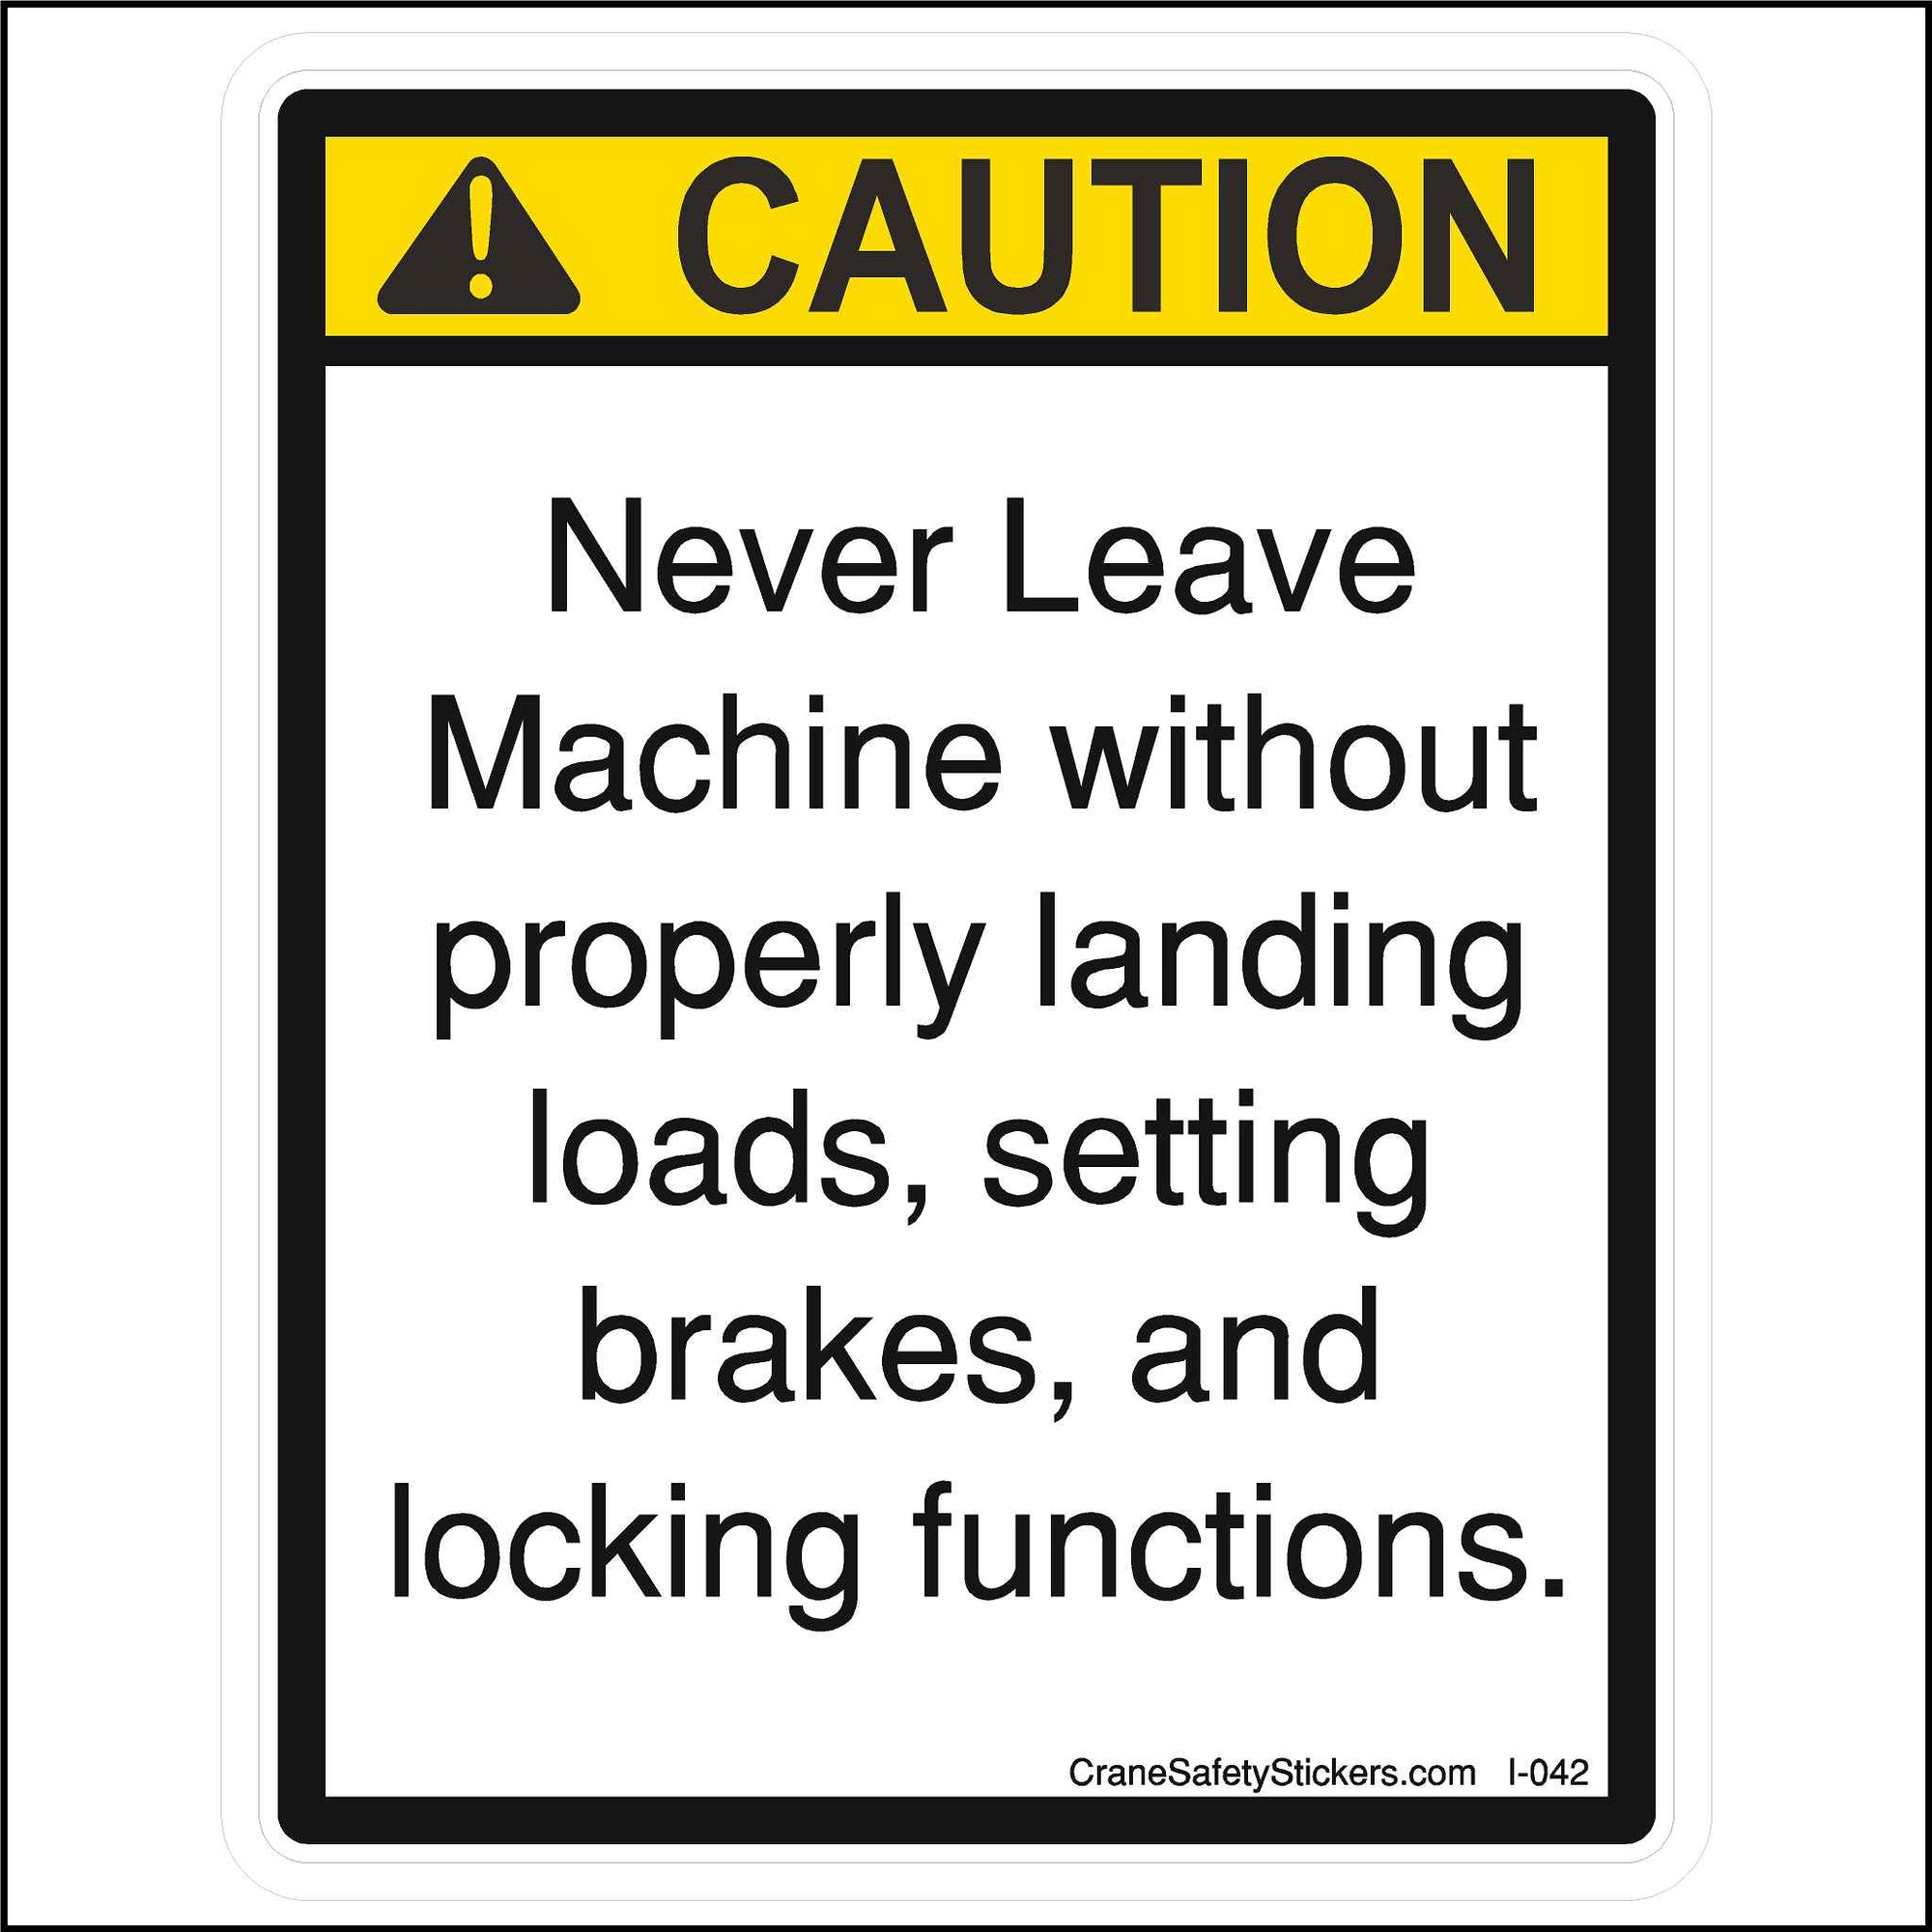 This Never Leave Machine Without Properly Landing Loads Sticker is printed with.  CAUTION, Never leave the Machine Without Properly Landing Loads, Setting Brakes, and Locking Functions.